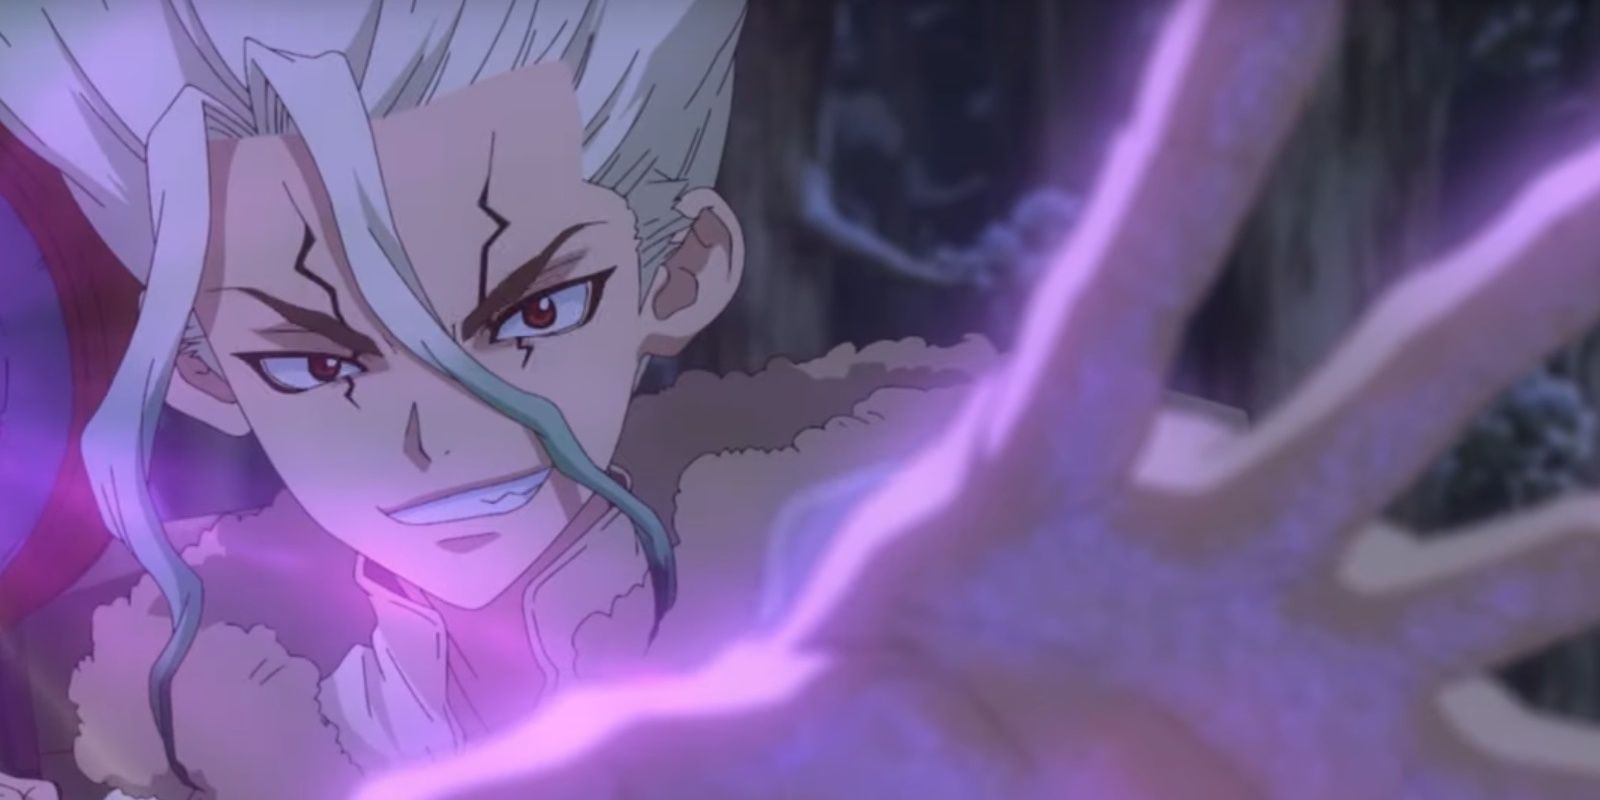 Senku Ishigami From Dr Stone With His Hand Out Under A Black Light